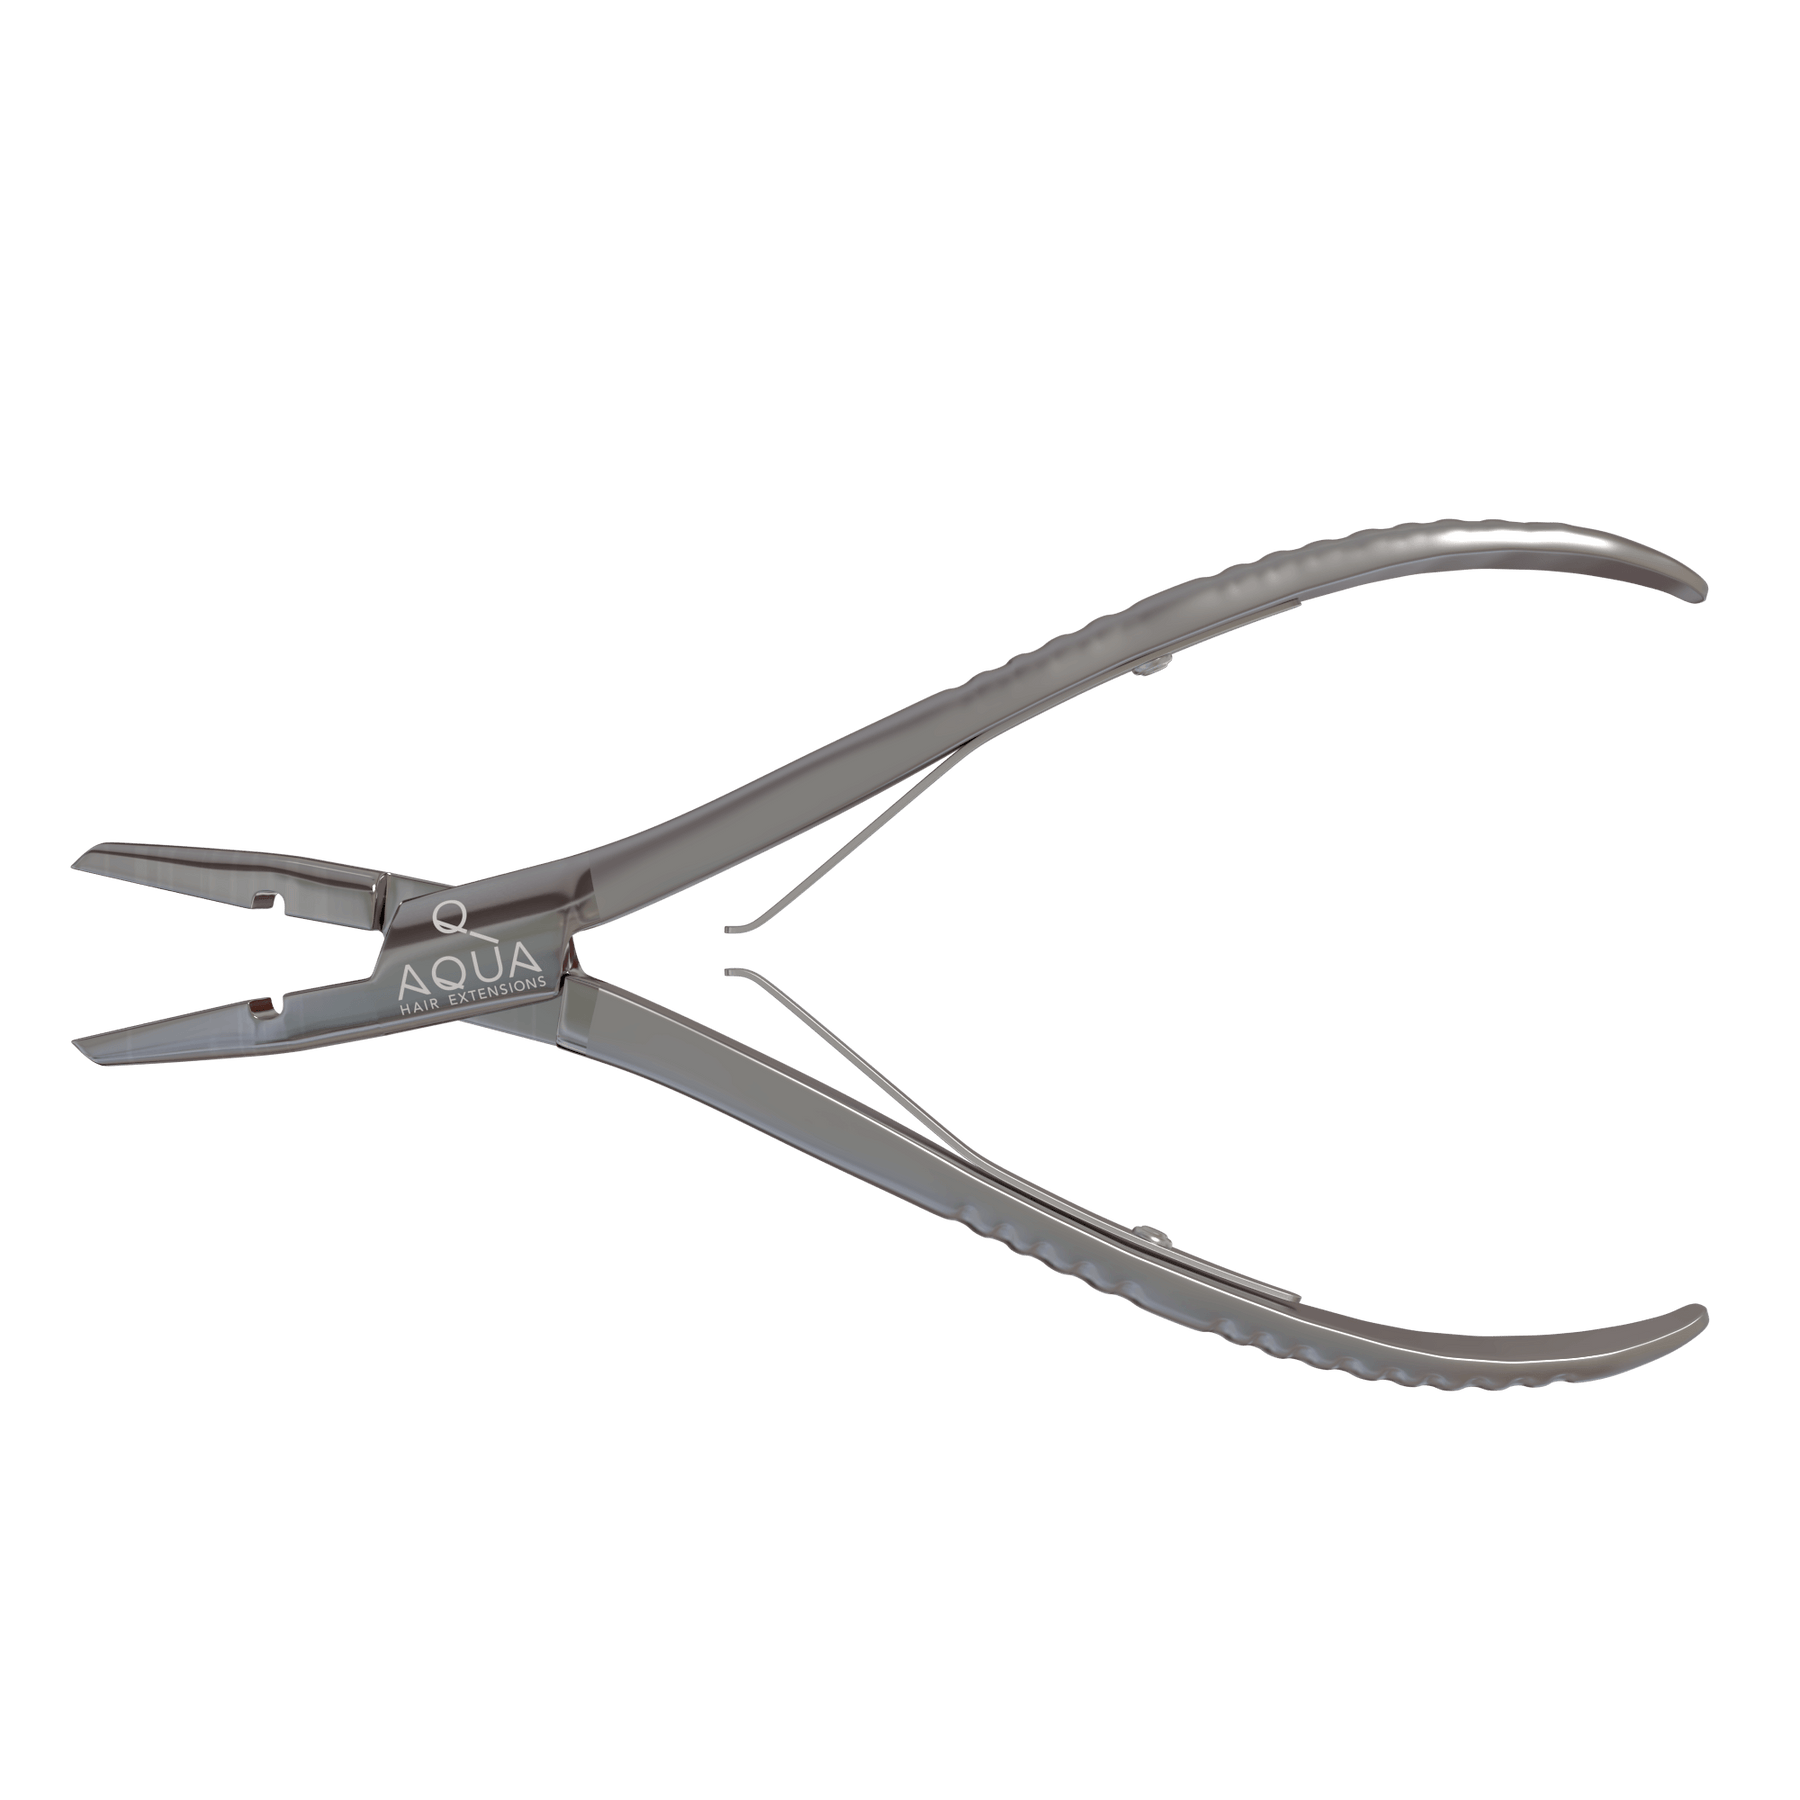 Tape hair extensions tools Plier Stainless Steel Pliers for tape